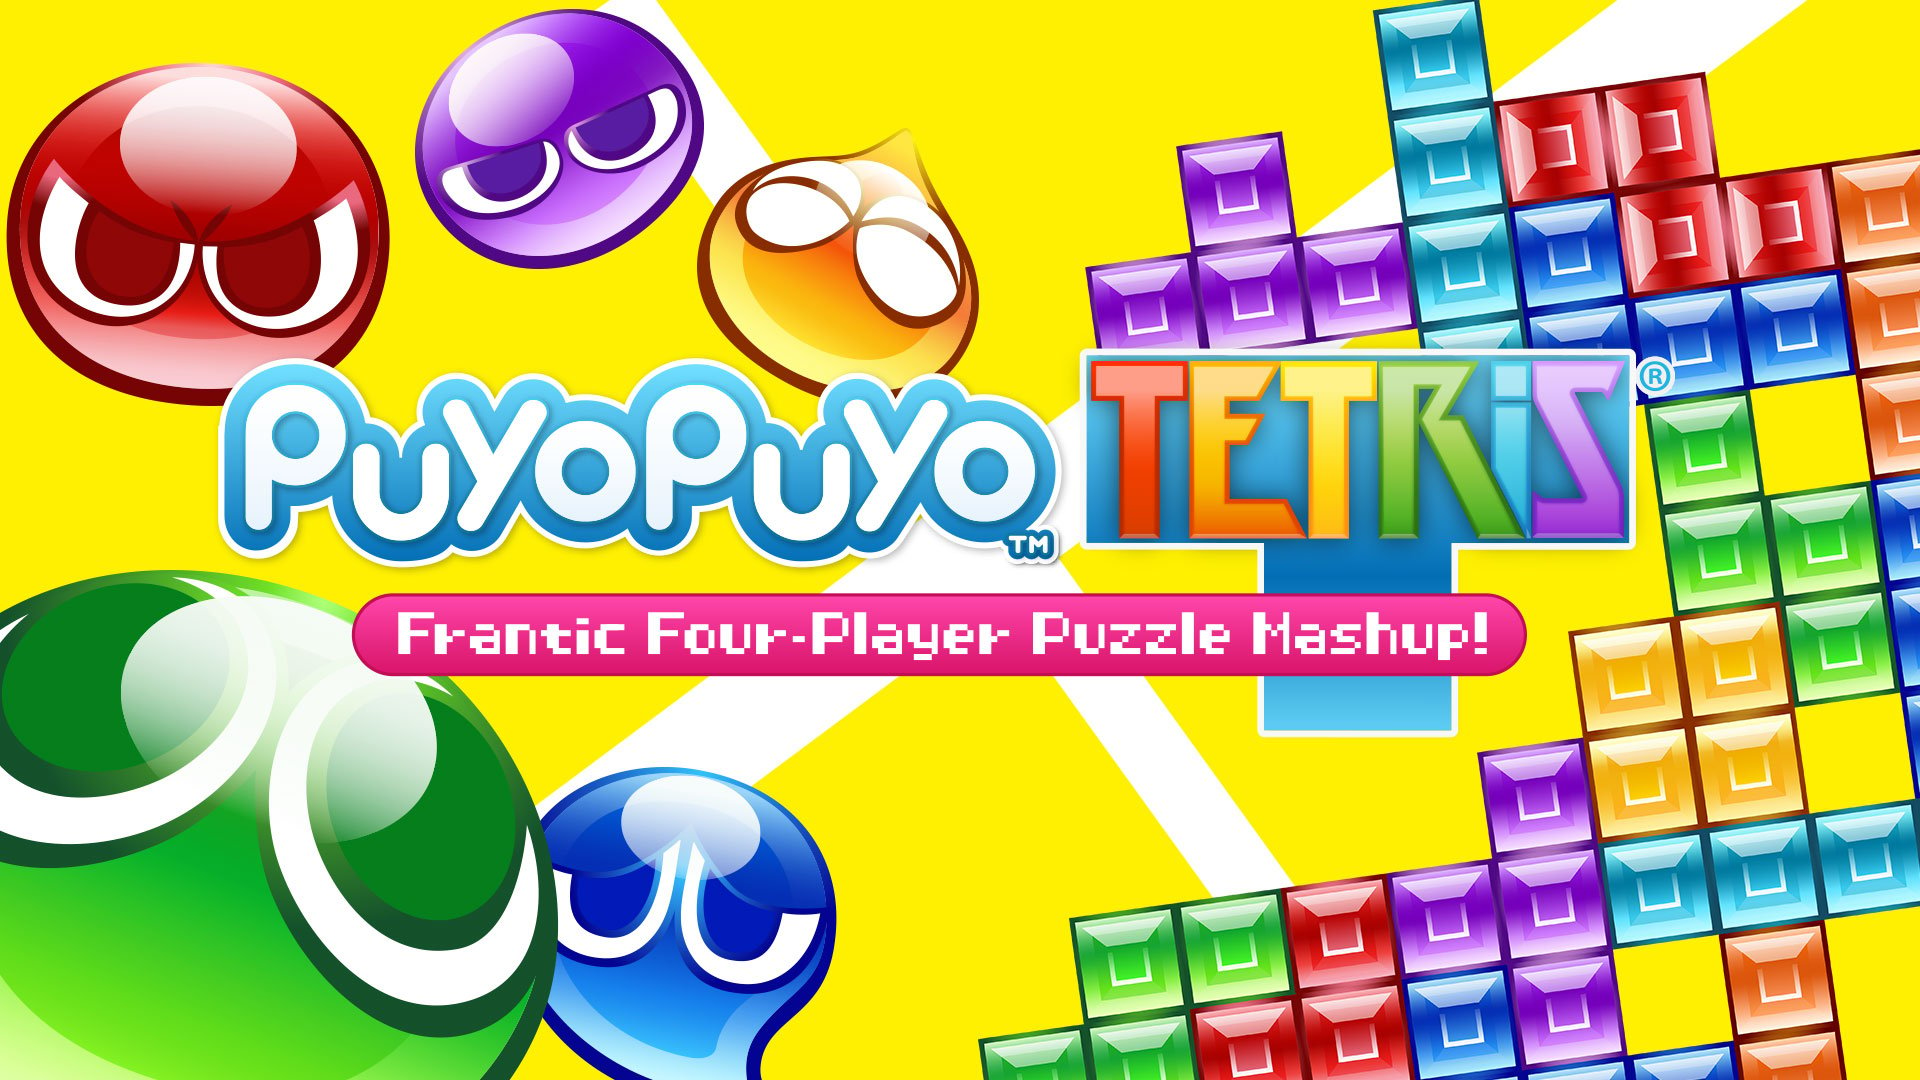 Puyo Puyo Tetris – The Frantic Four-Player Puzzle Mashup – is Now Available in the Americas